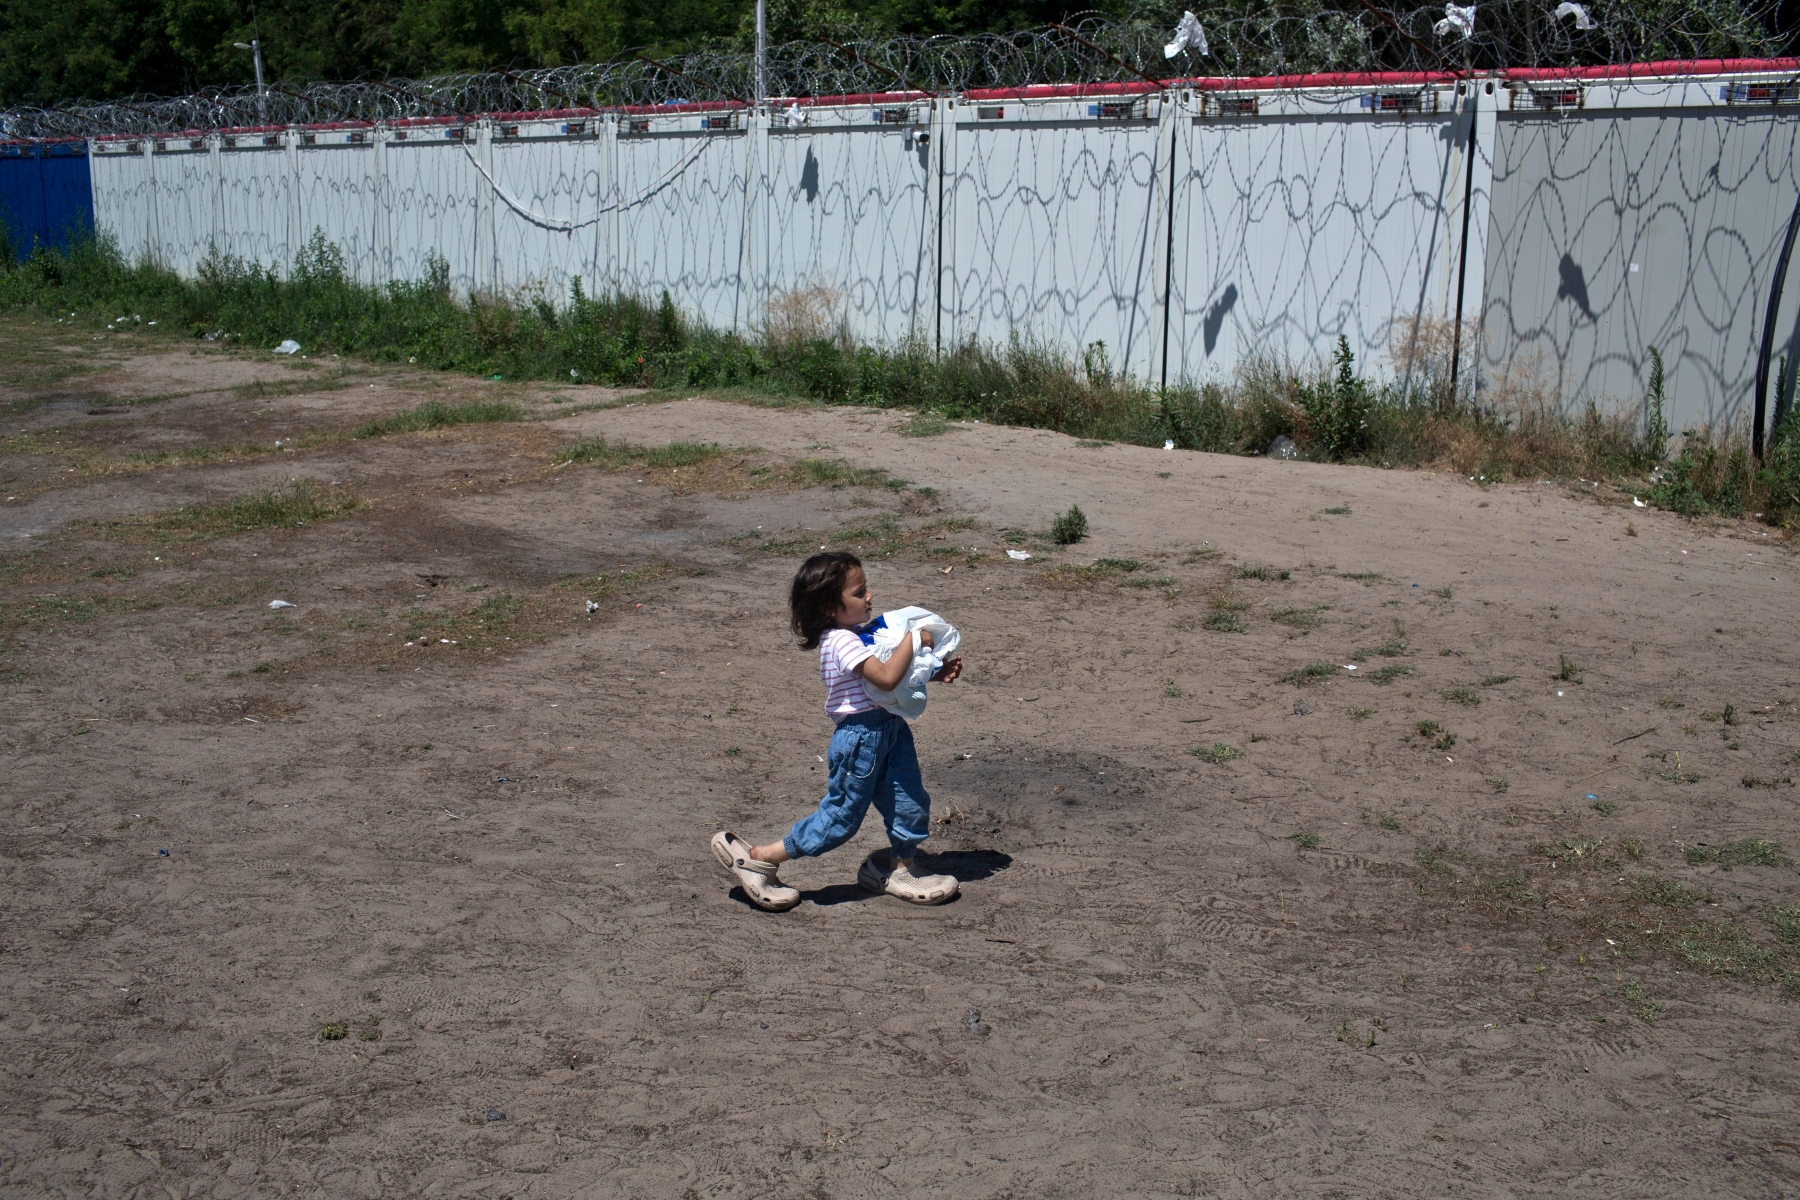 A child carries an aid package at a makeshift camp for migrants and refugees situated meters away from the Serbian border with Hungary, in Horgos, Serbia, Monday, July 4, 2016. Waiting in the summer heat with limited running water, hundreds of refugees camping out on the Serbian-Hungarian border are facing uncertain prospects as EU nation Hungary prepares to implement new, tighter asylum rules on Tuesday. (AP Photo/Marko Drobnjakovic) Serbia Migrants Uncertain Future